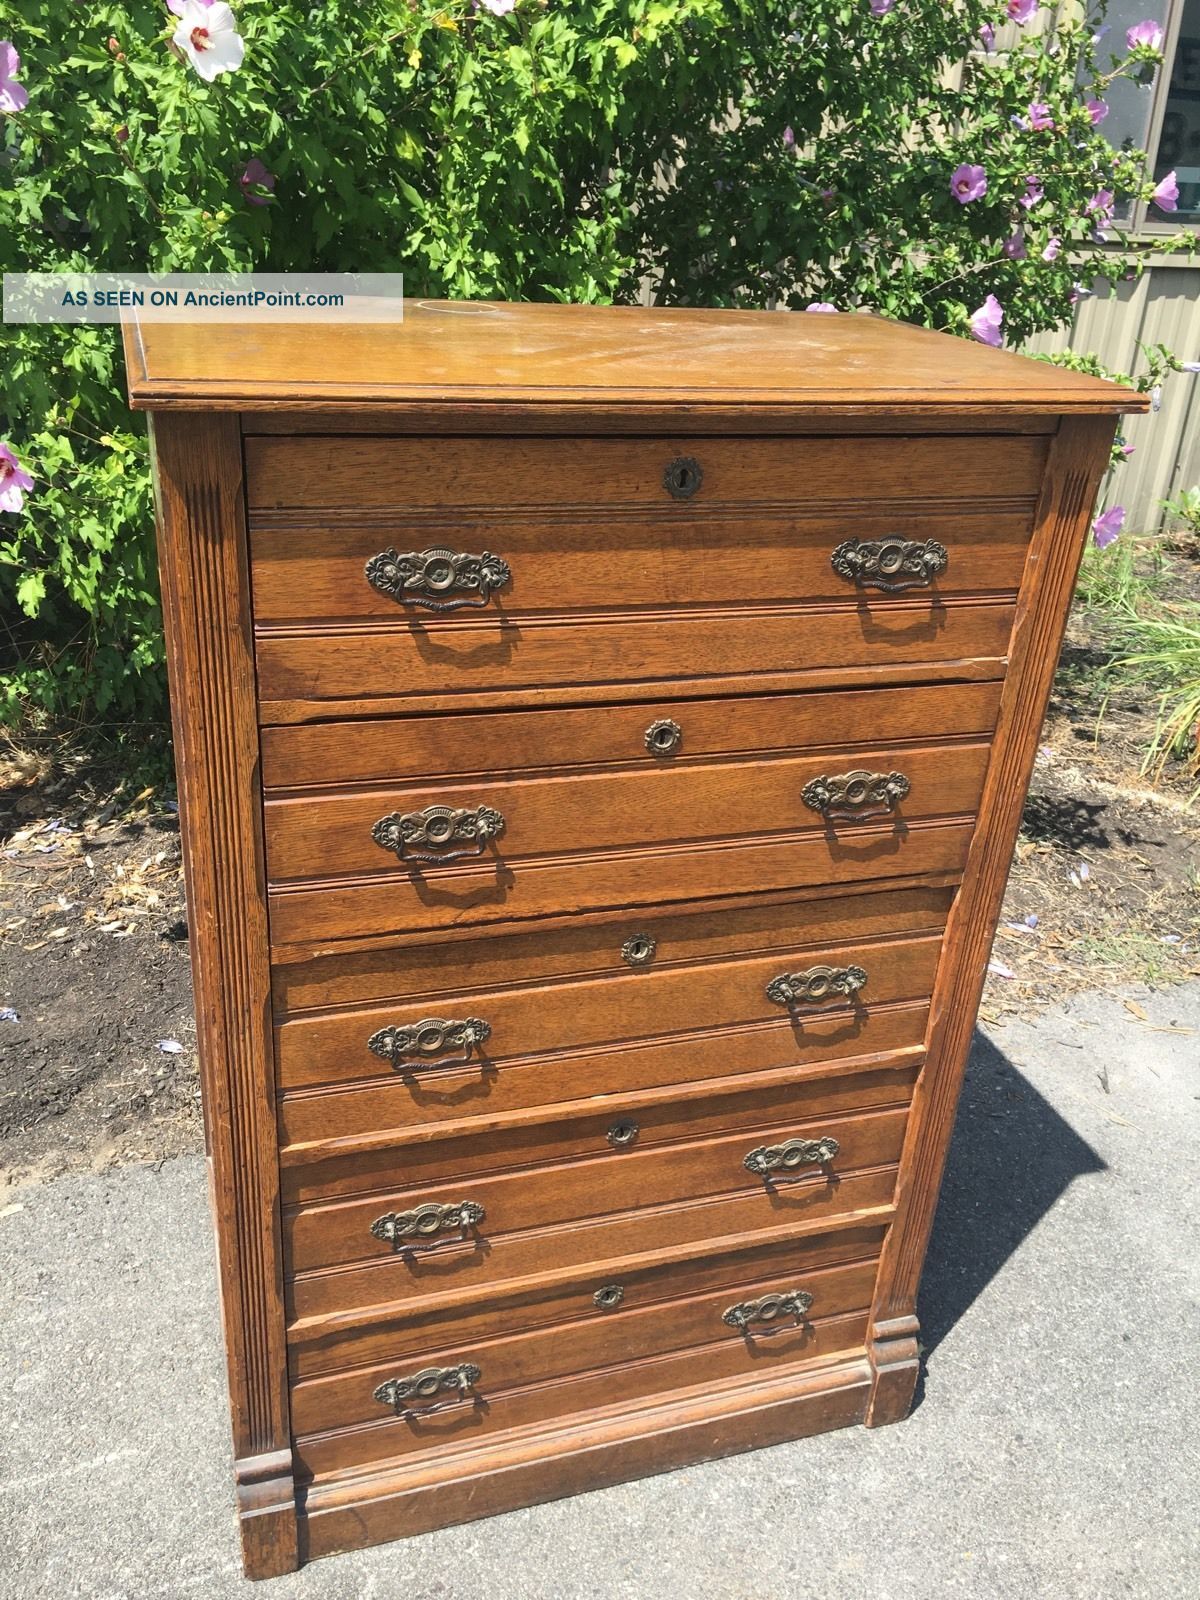 Antique Eastlake Victorian Carved Walnut Country Dresser Bureau Chest Of Drawers 1800-1899 photo